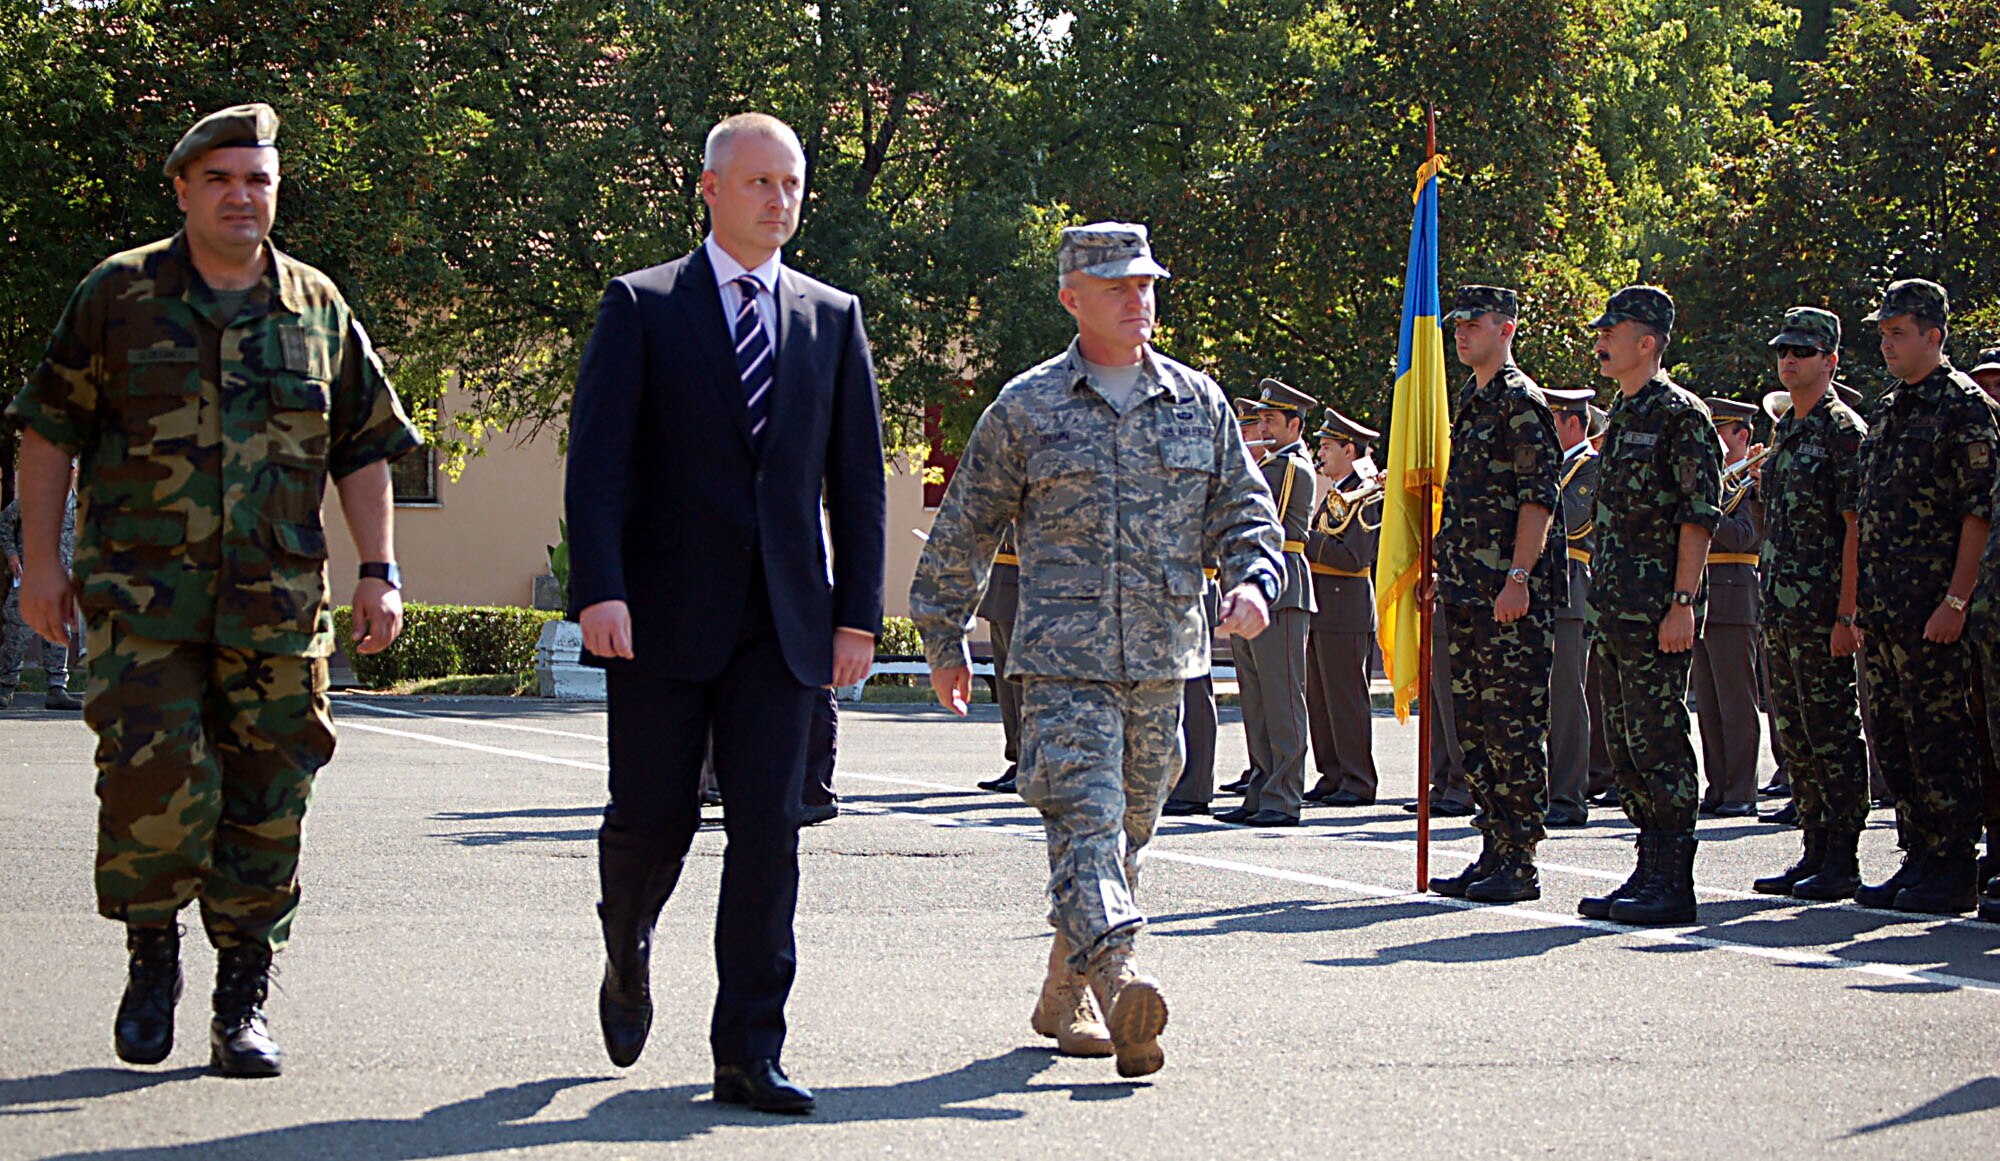 NIS, Serbia – From left: Lt. Col. Goran Desancic, Serbian Armed Forces MEDCEUR 2009 co-director; Zoran Vesic, a Serbian state secretary; and Col. Tim Brown, 435th Contingency Response Group commander and U.S. MEDCEUR 2009 co-director, walk past members of the Ukrainian military during the opening ceremony for MEDCEUR 2009, or the military medical training exercise in Central and Eastern Europe. More than 15 nations will participate in the exercise scheduled for Sept. 2-13. (U.S. Air Force photo/Senior Airman Kali L. Gradishar)